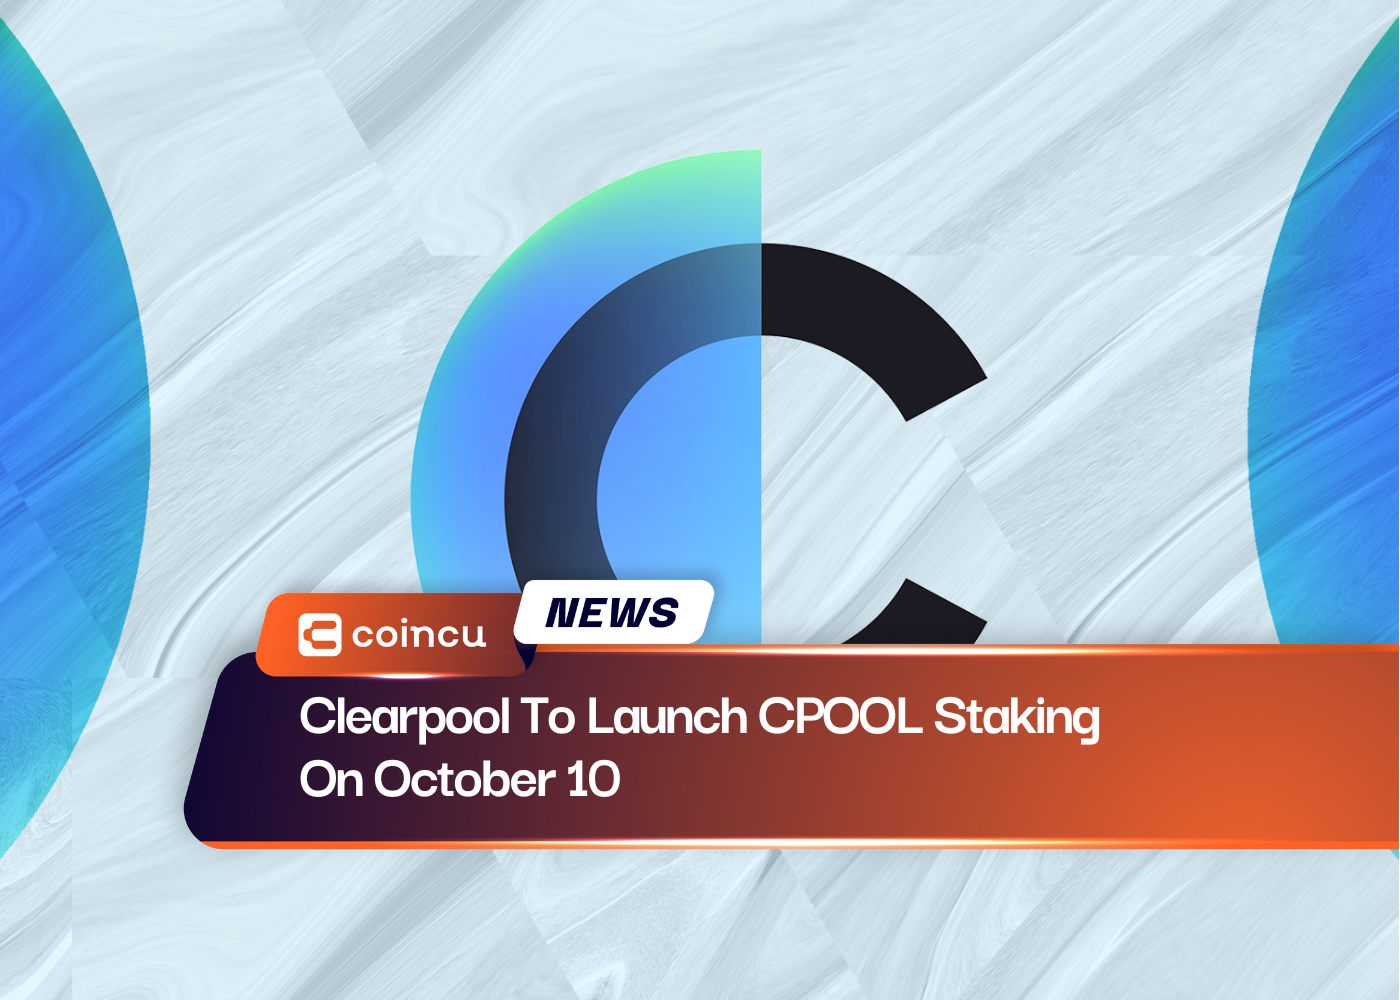 Clearpool To Launch CPOOL Staking On October 10